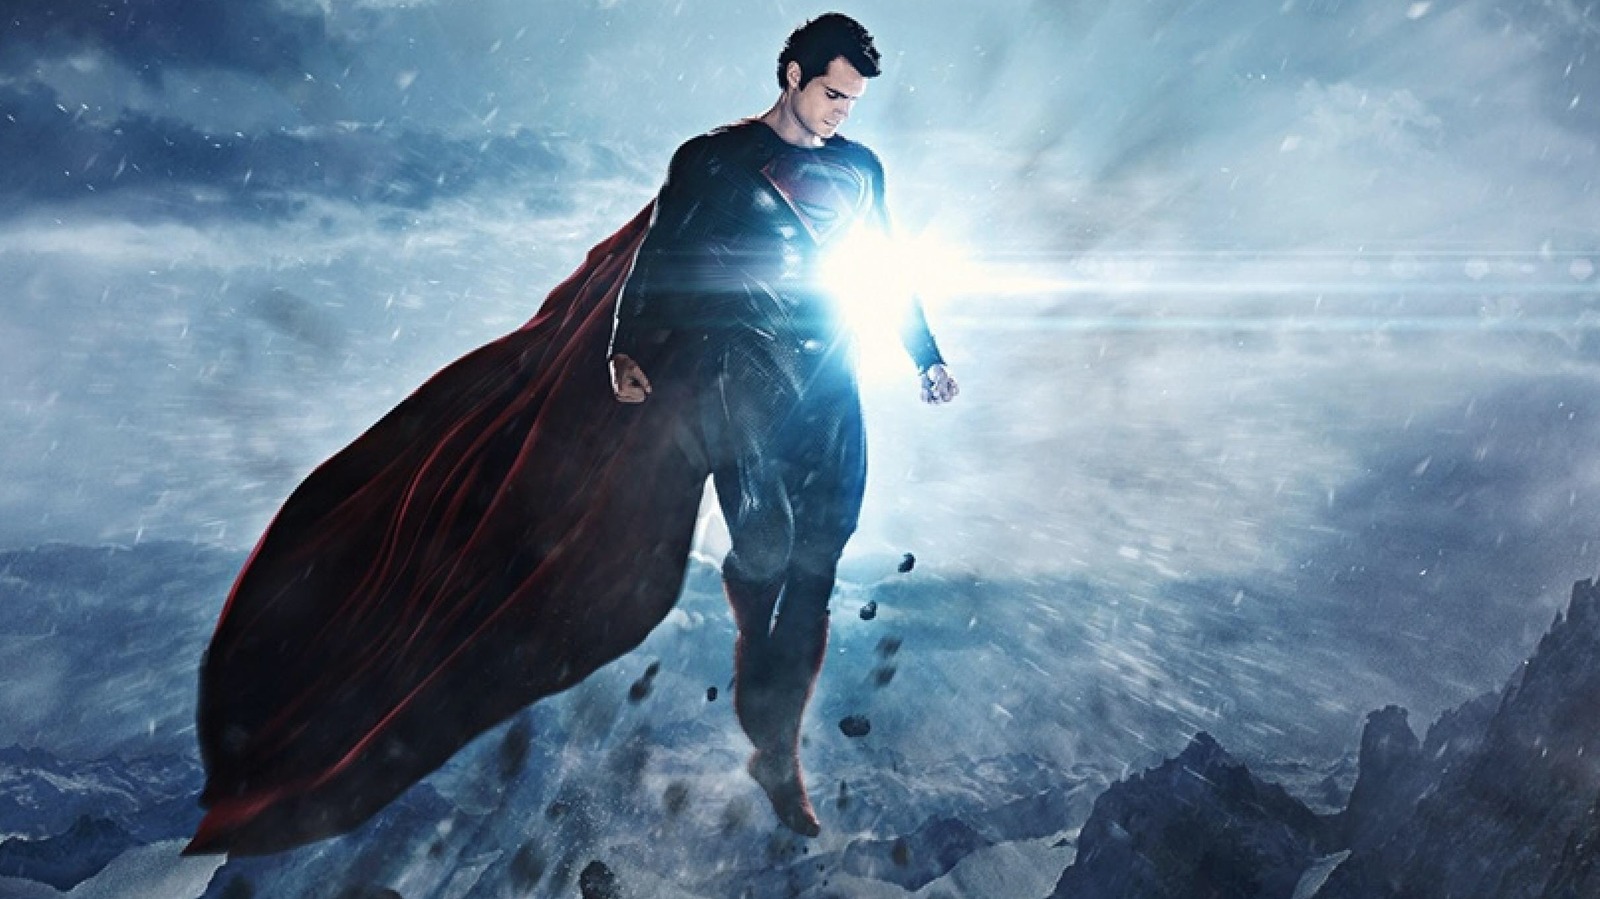 Superman' Star Henry Cavill: How I'm Preparing for 'Man of Steel' Role  (Video) – The Hollywood Reporter